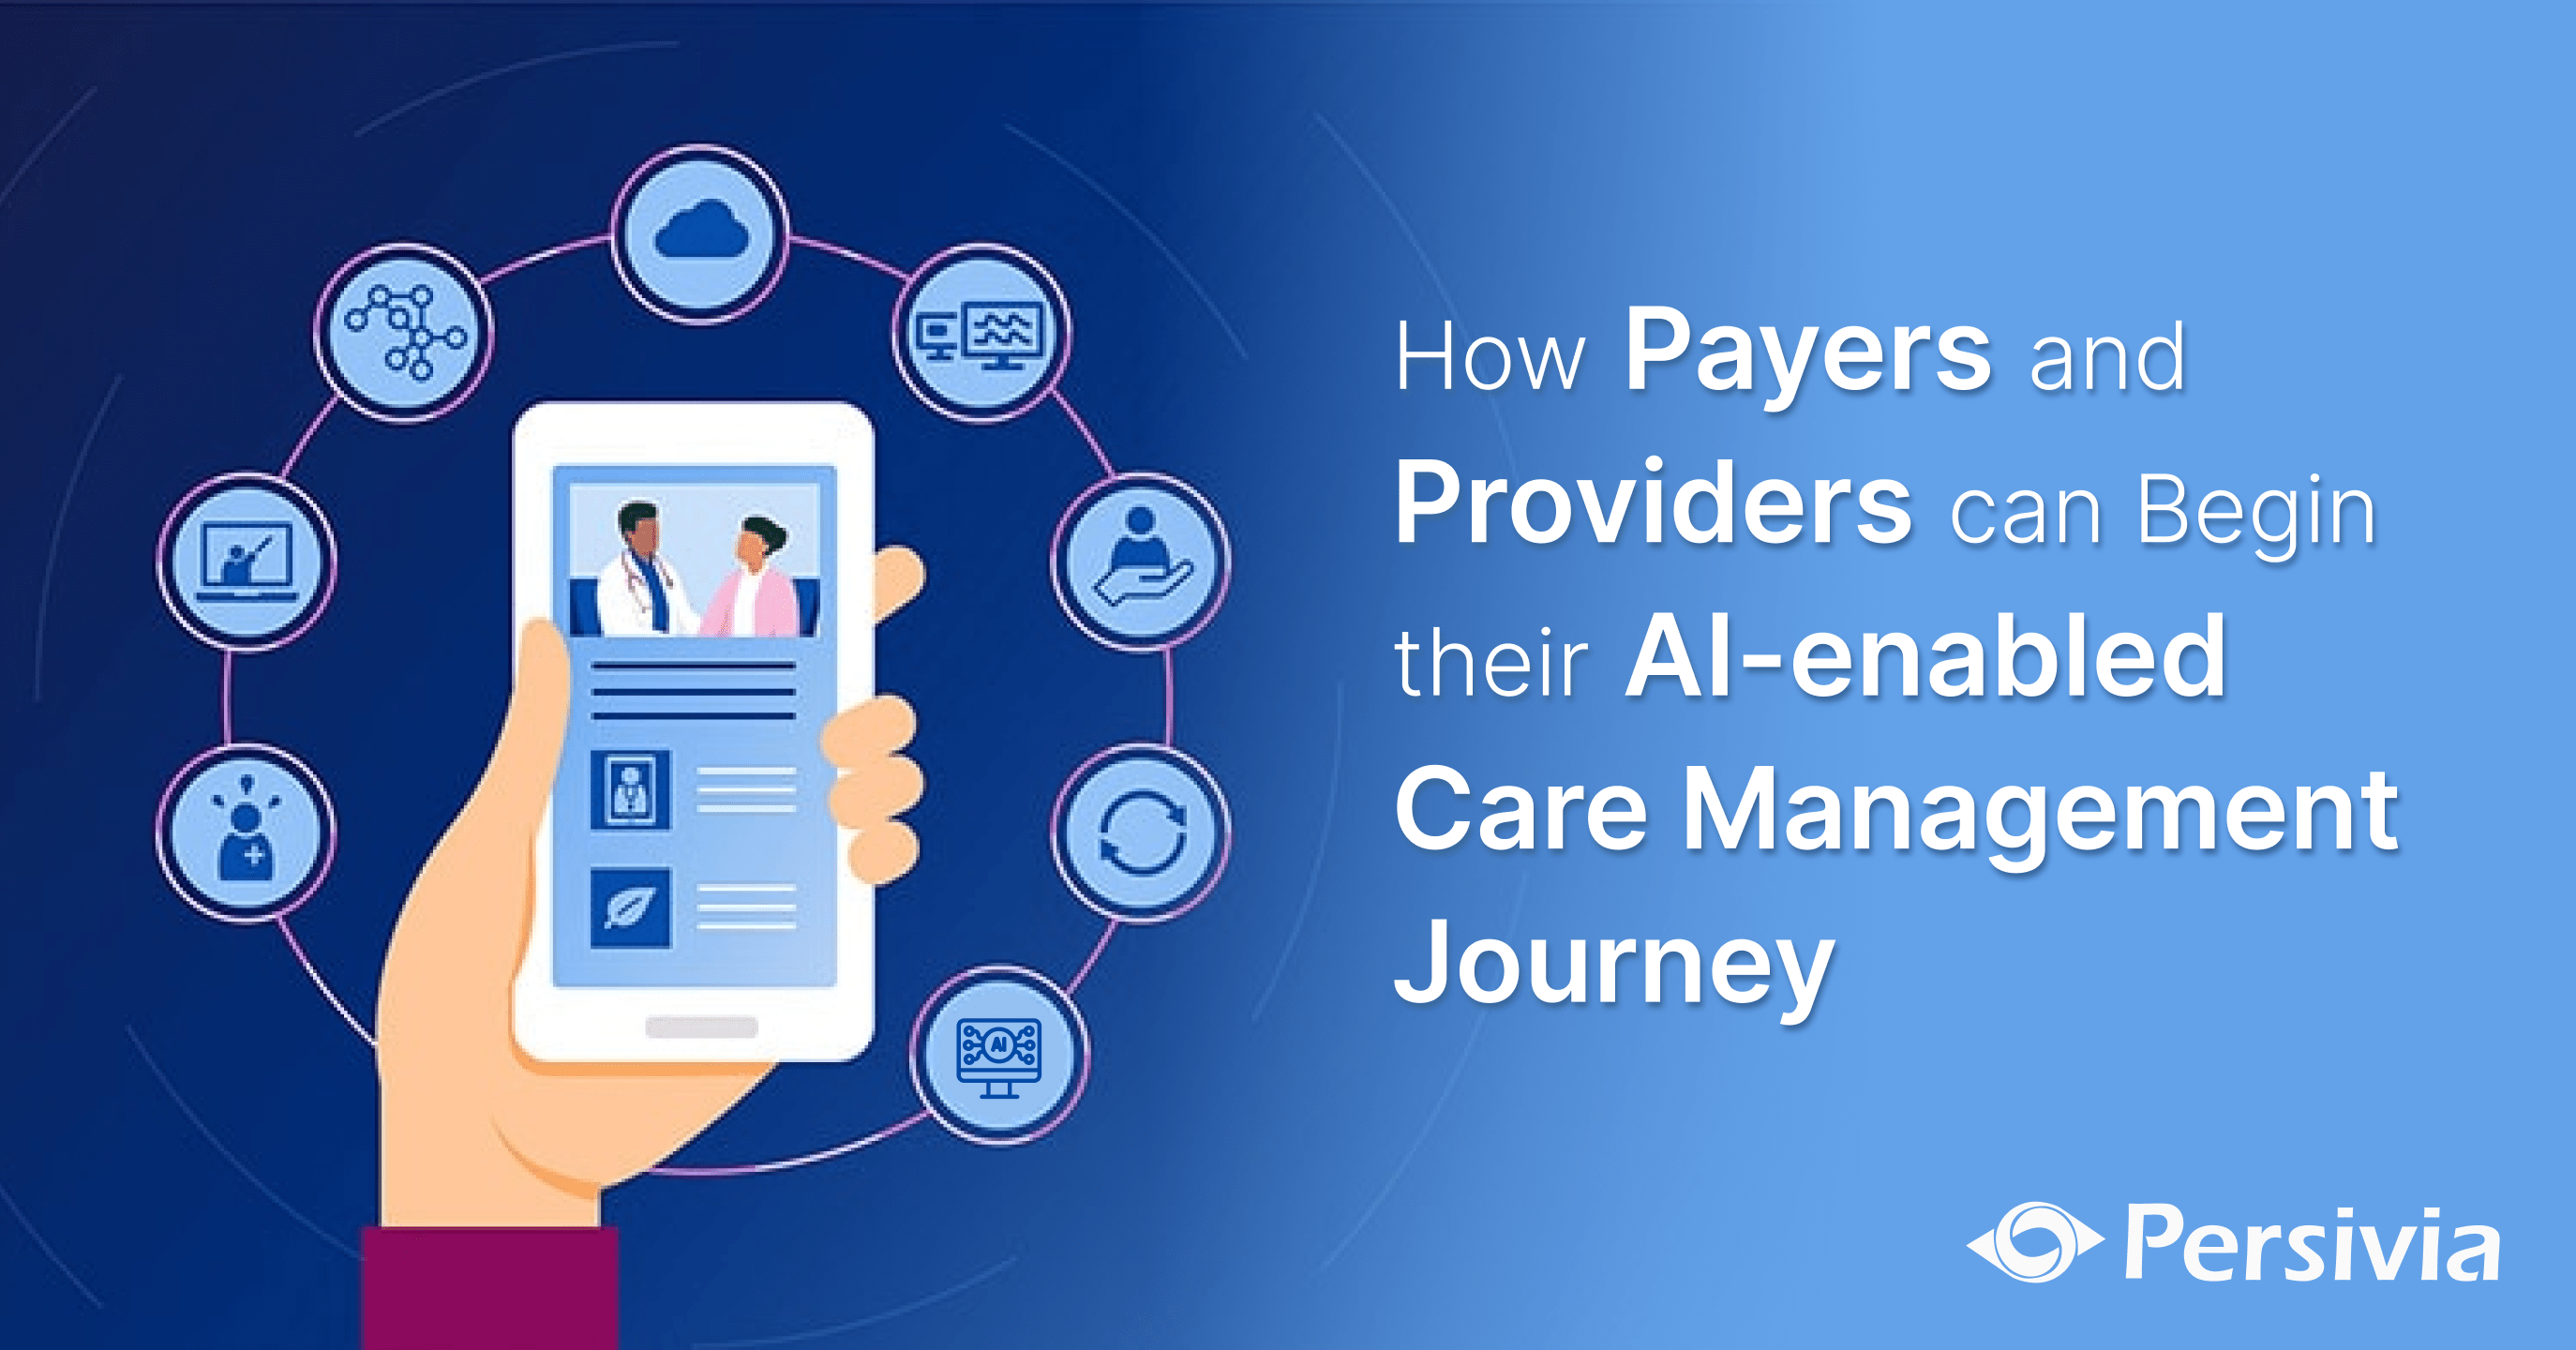 How Payers and Providers can Begin their AI-enabled Care Management Journey